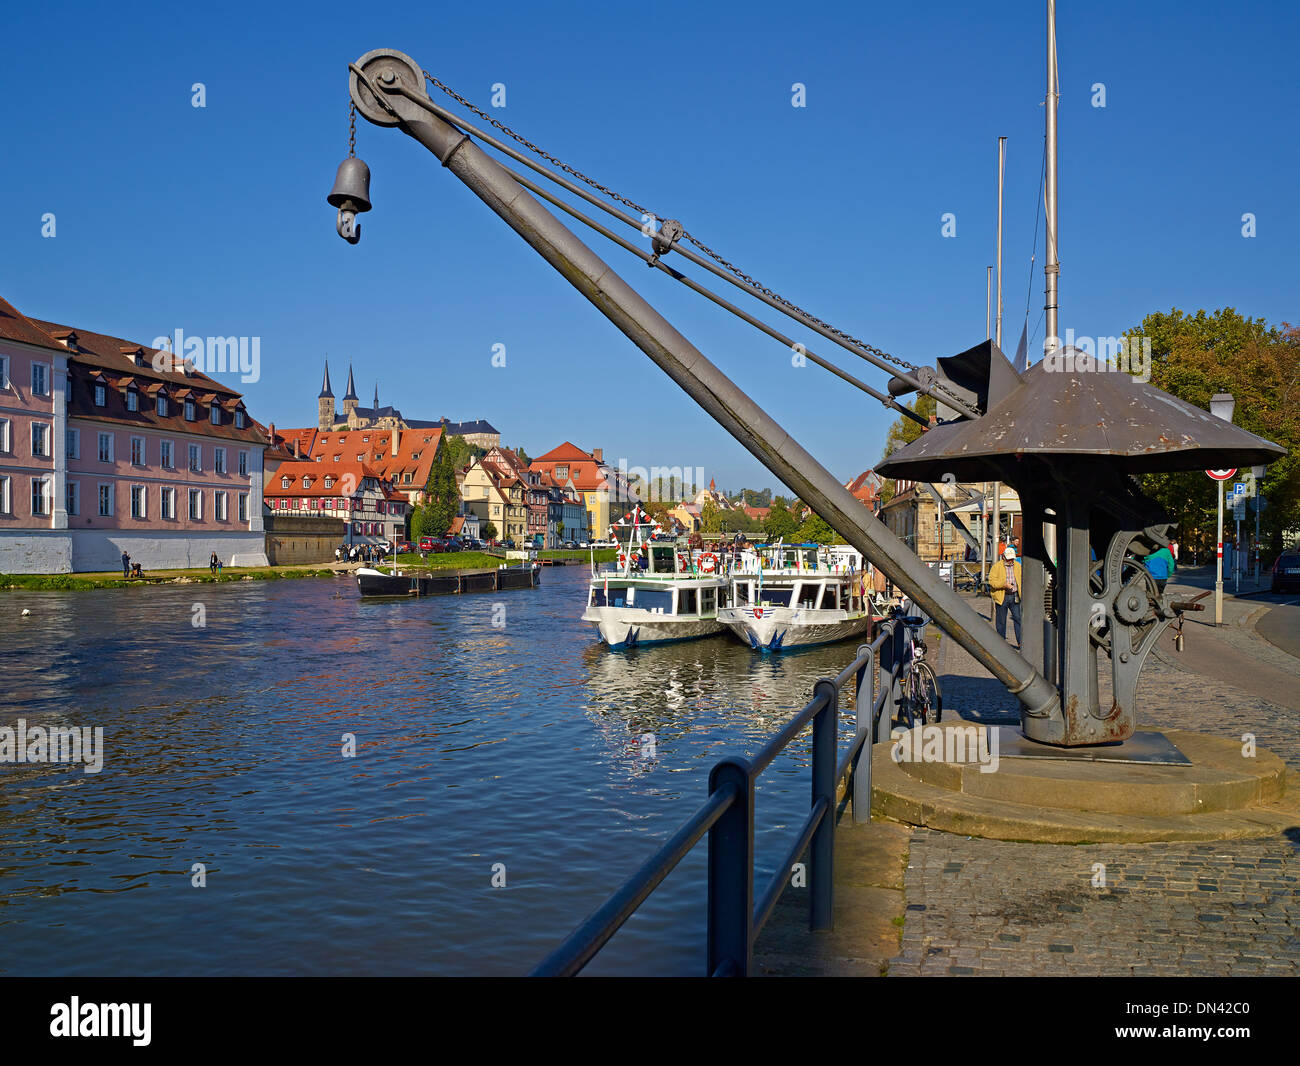 Old derrick and excursion boats at Regnitz river in Bamberg, Upper Franconia, Bavaria, Germany Stock Photo